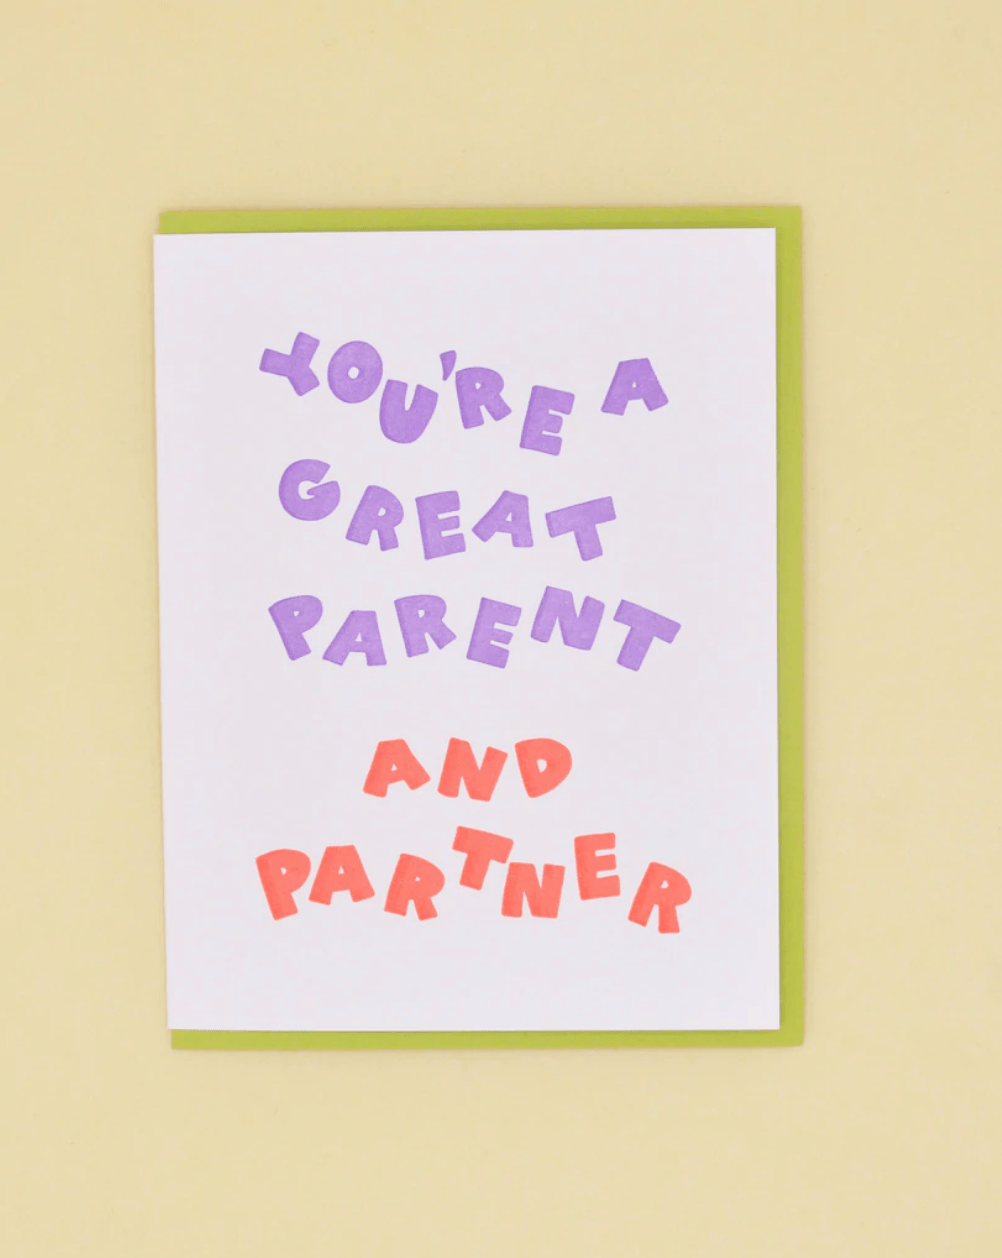 And Here We Are sticker Parent and Partner Card